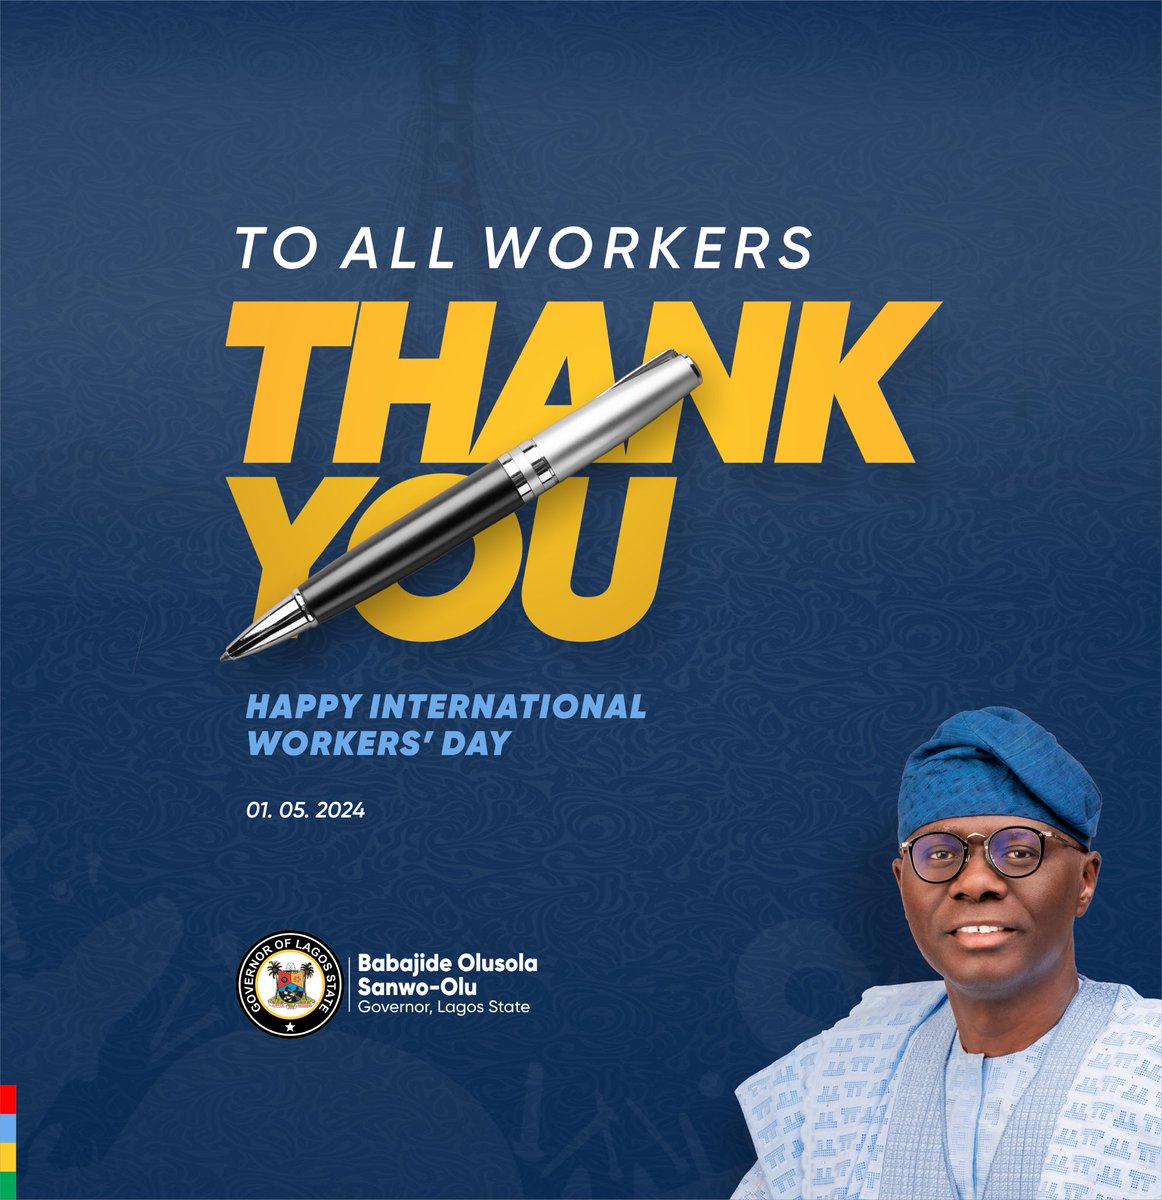 As we celebrate Worker's Day, I extend my deepest gratitude to every hardworking individual in Lagos. Your commitment forms the backbone of our vibrant city. Today, we acknowledge your efforts and the progress we've achieved together. Moving forward, our administration remains…